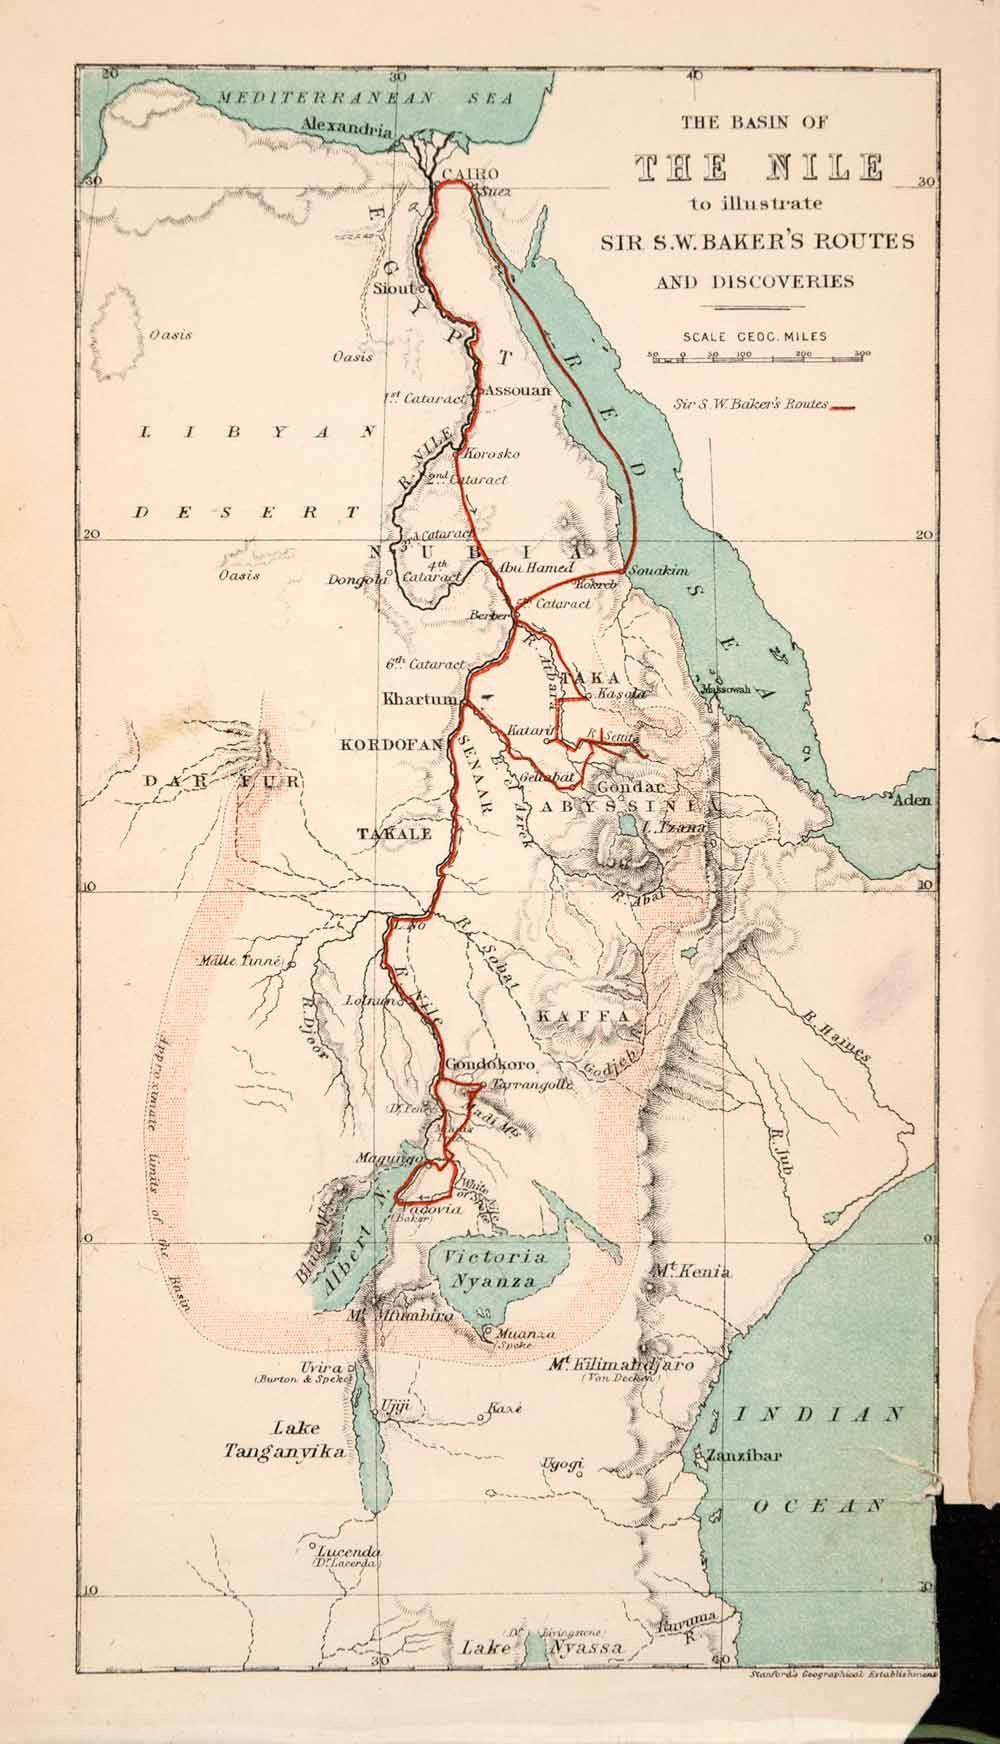 1868 Lithograph Map Nile Basin Sir S.W. Baker Discovery Egypt Libyan XGBA1 - Period Paper
